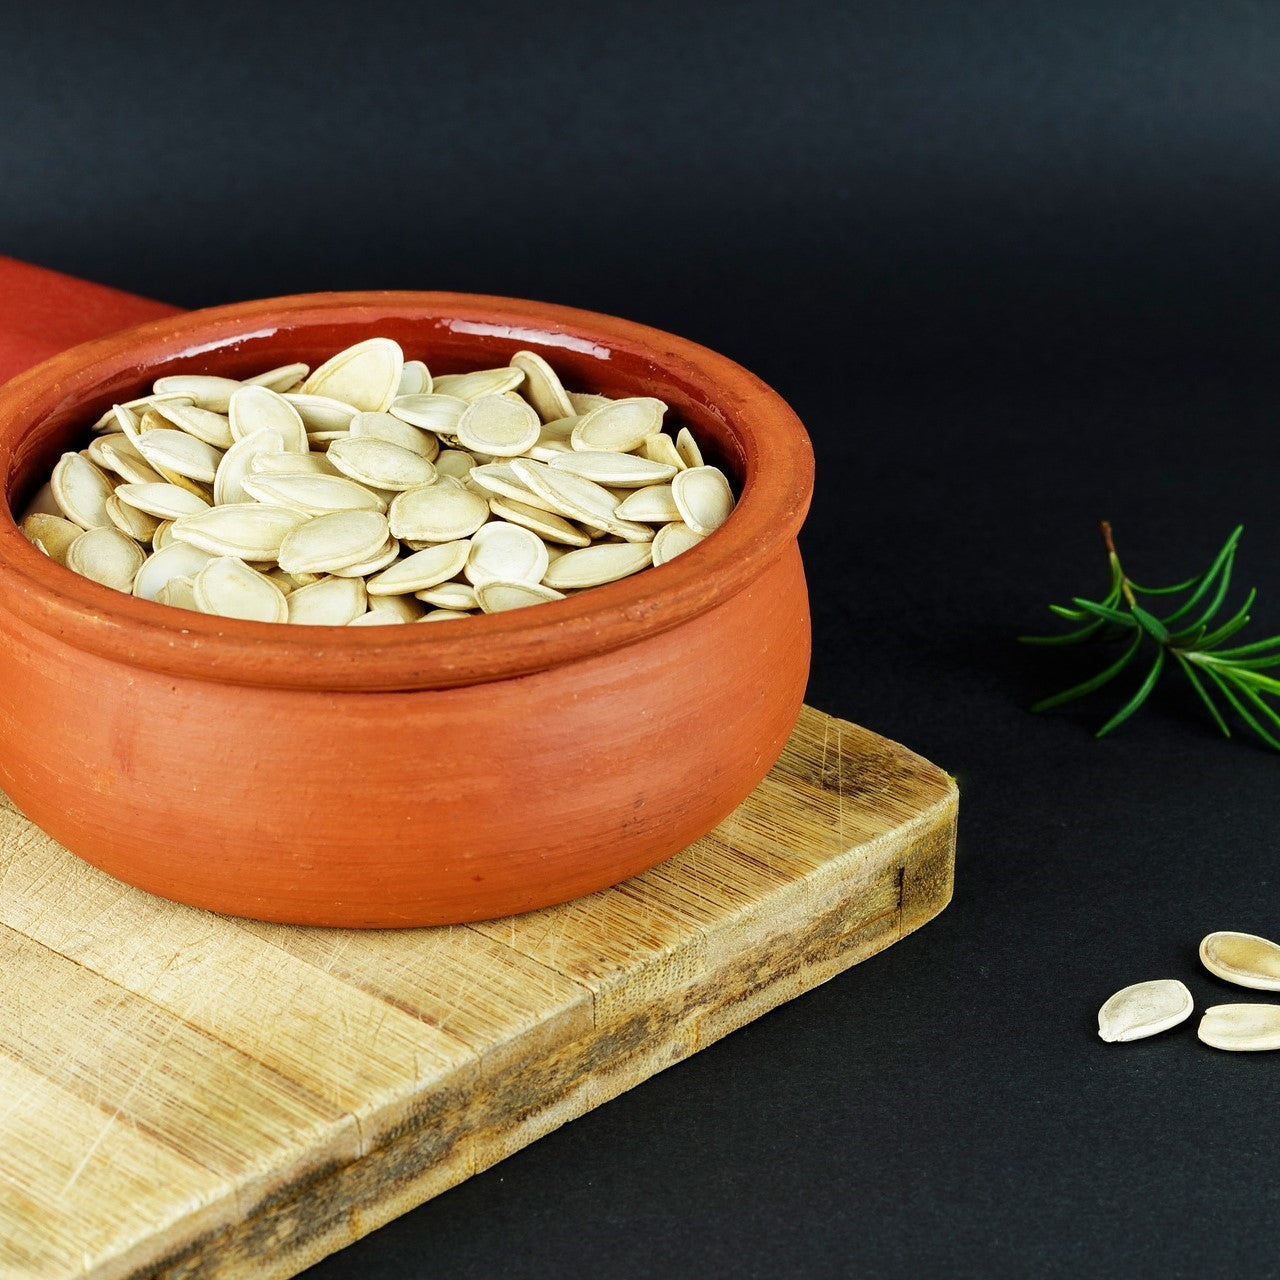 What are the Health Benefits of Pumpkin Seeds?